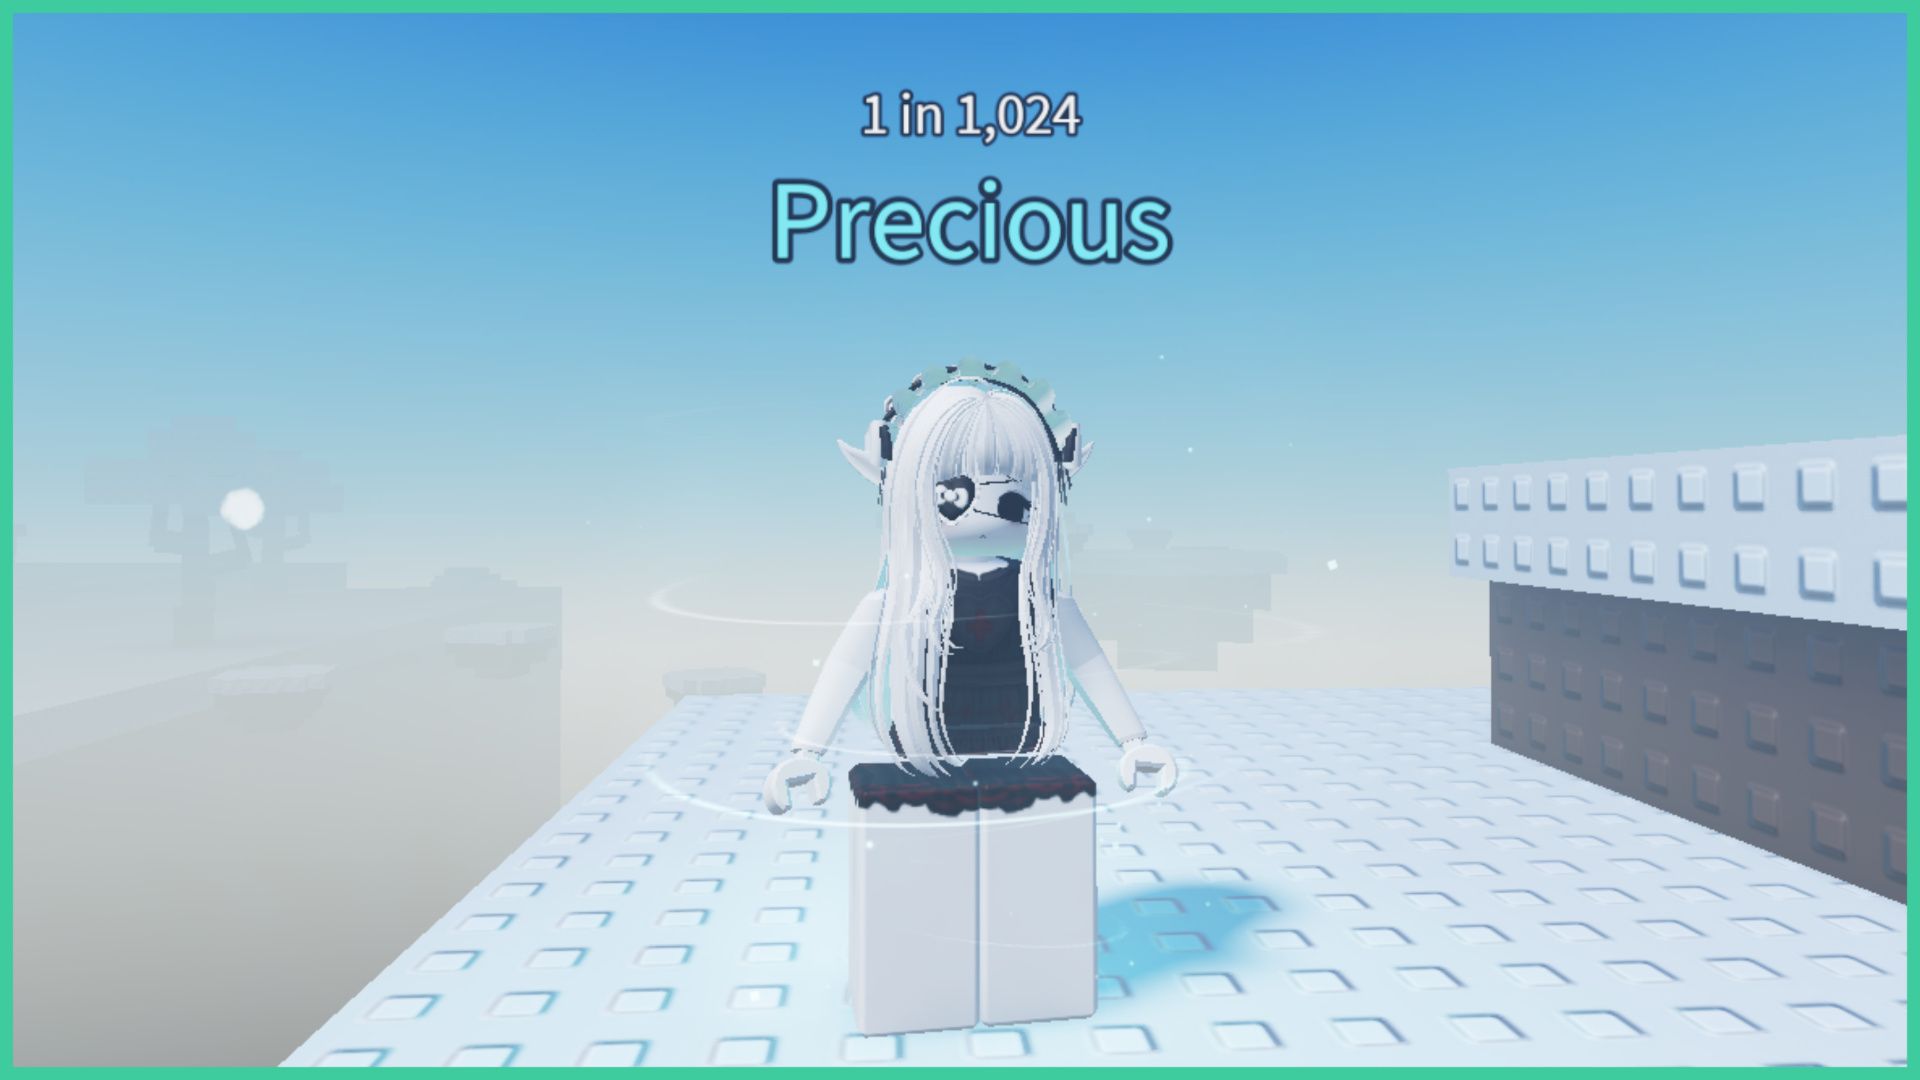 feature image for our sol's rng cods guide, the image features a screenshot of a roblox player standing on some snow as they have the precious aura, which is a light spiralling around them with floating glowy dots